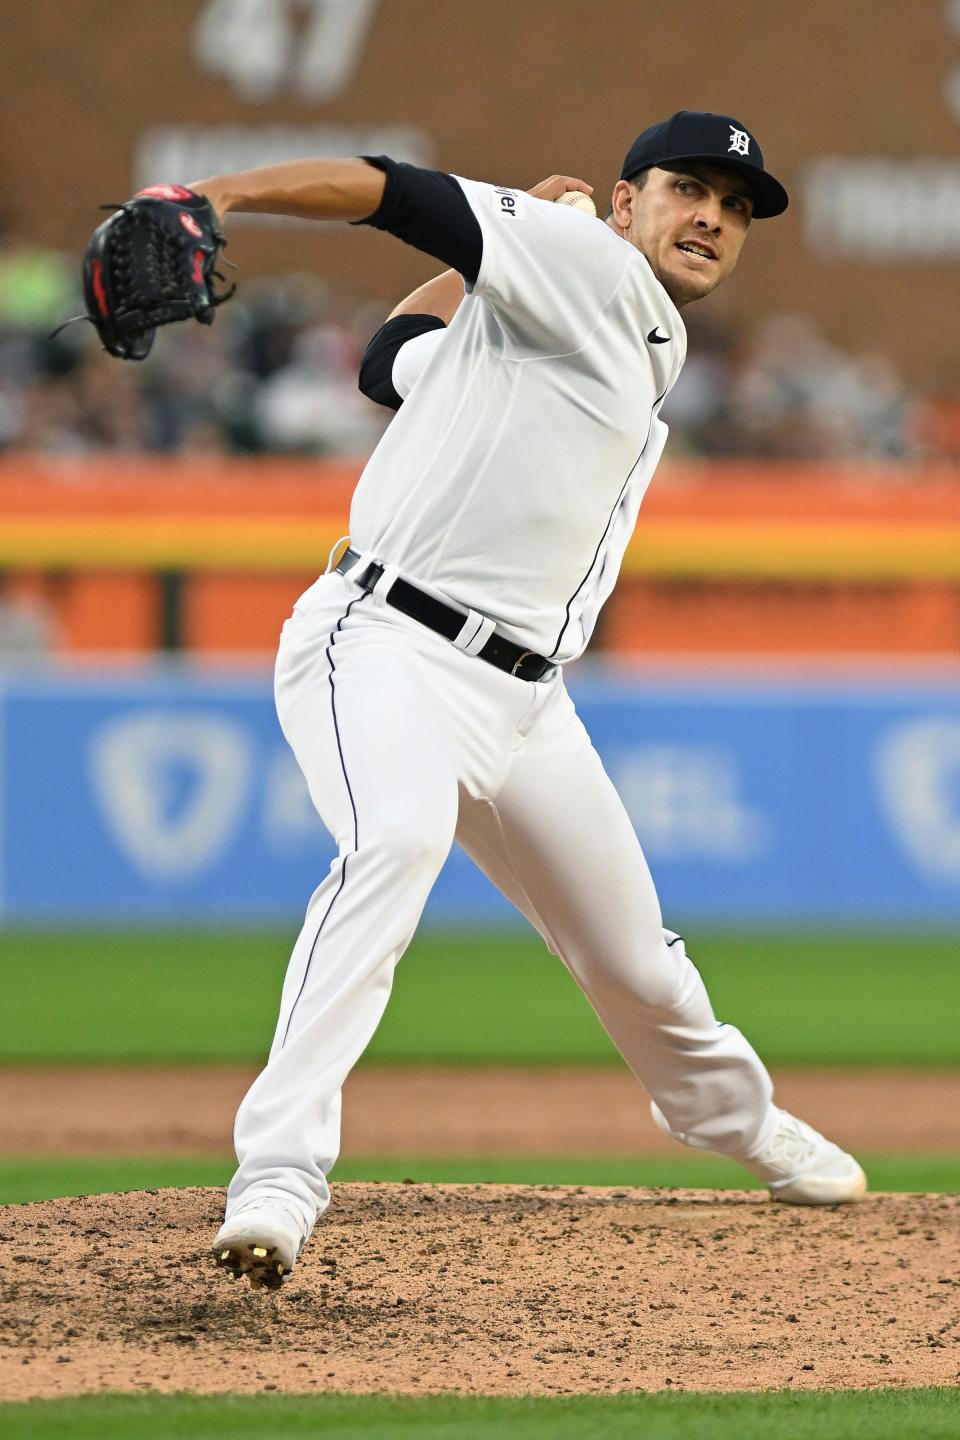 Tigers pitcher Andrew Vasquez throws a pitch in the sixth inning of the Tigers' 9-2 loss to the Astros on Saturday, Aug. 26, 2023, at Comerica Park.